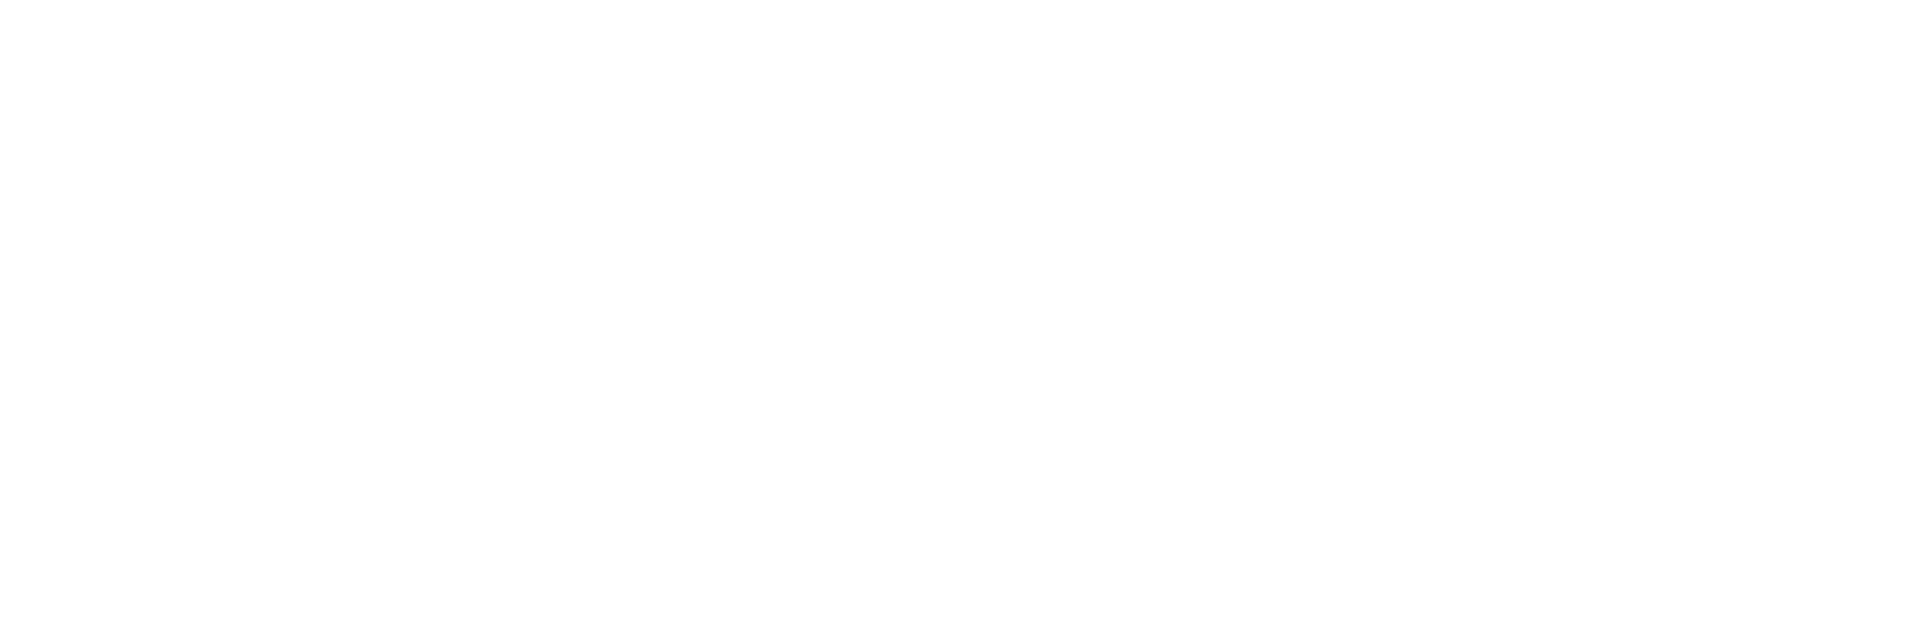 Reliable Mortgage